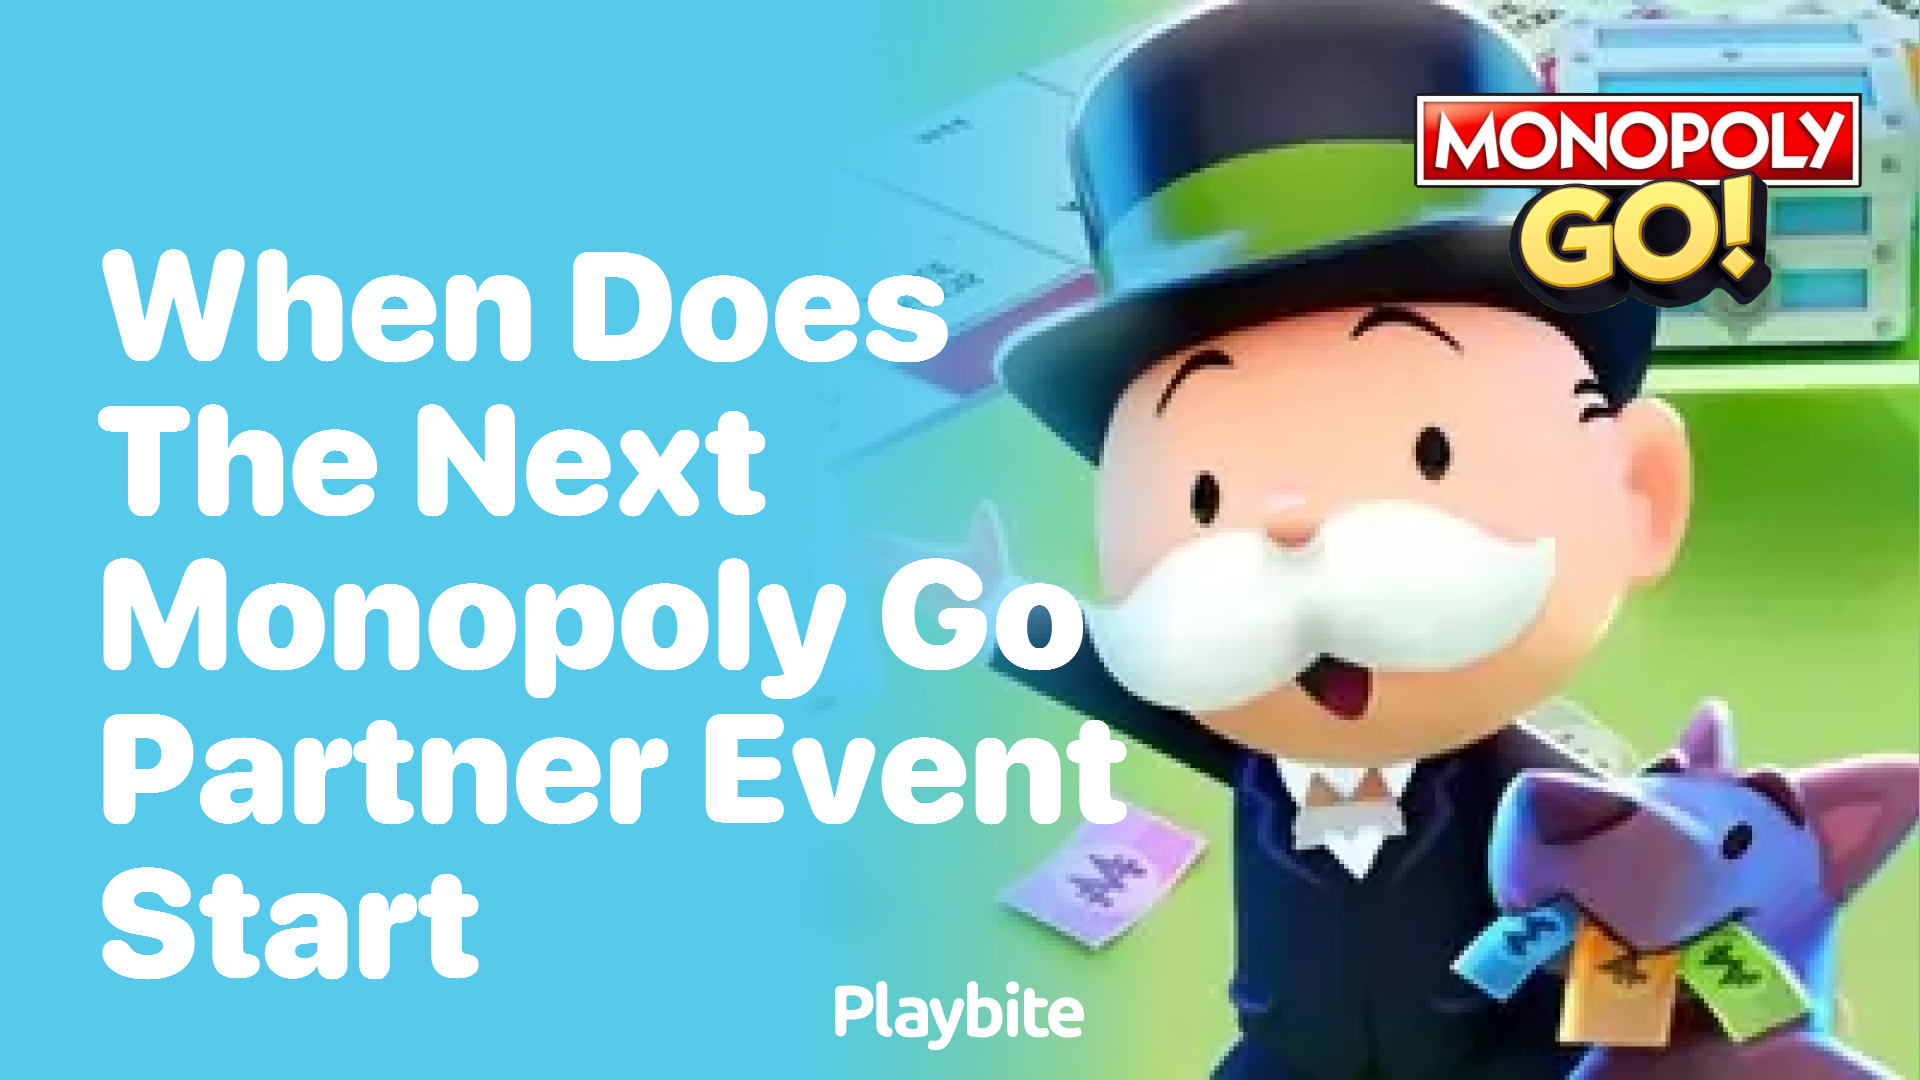 When Does the Next Monopoly Go Partner Event Start?